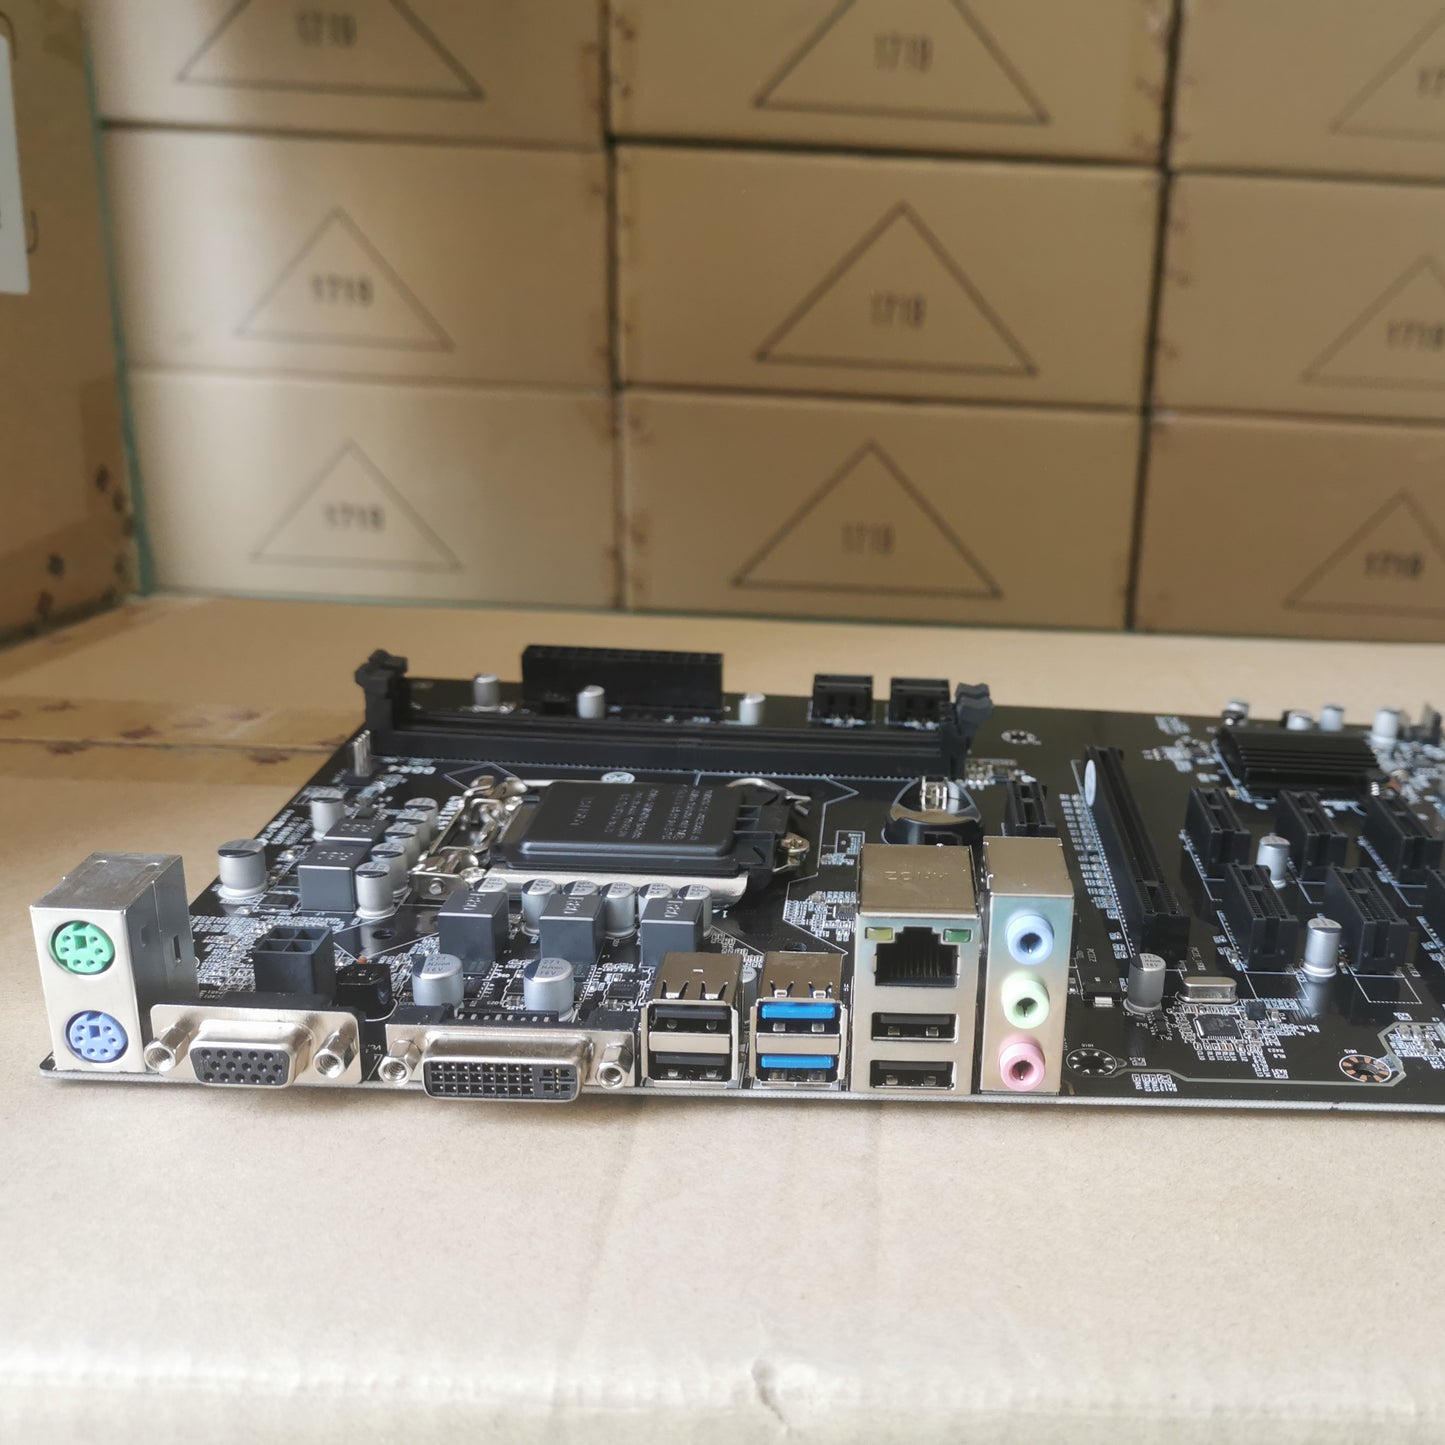 Mining Board Set With 12 PCIe Riser Connector Included!